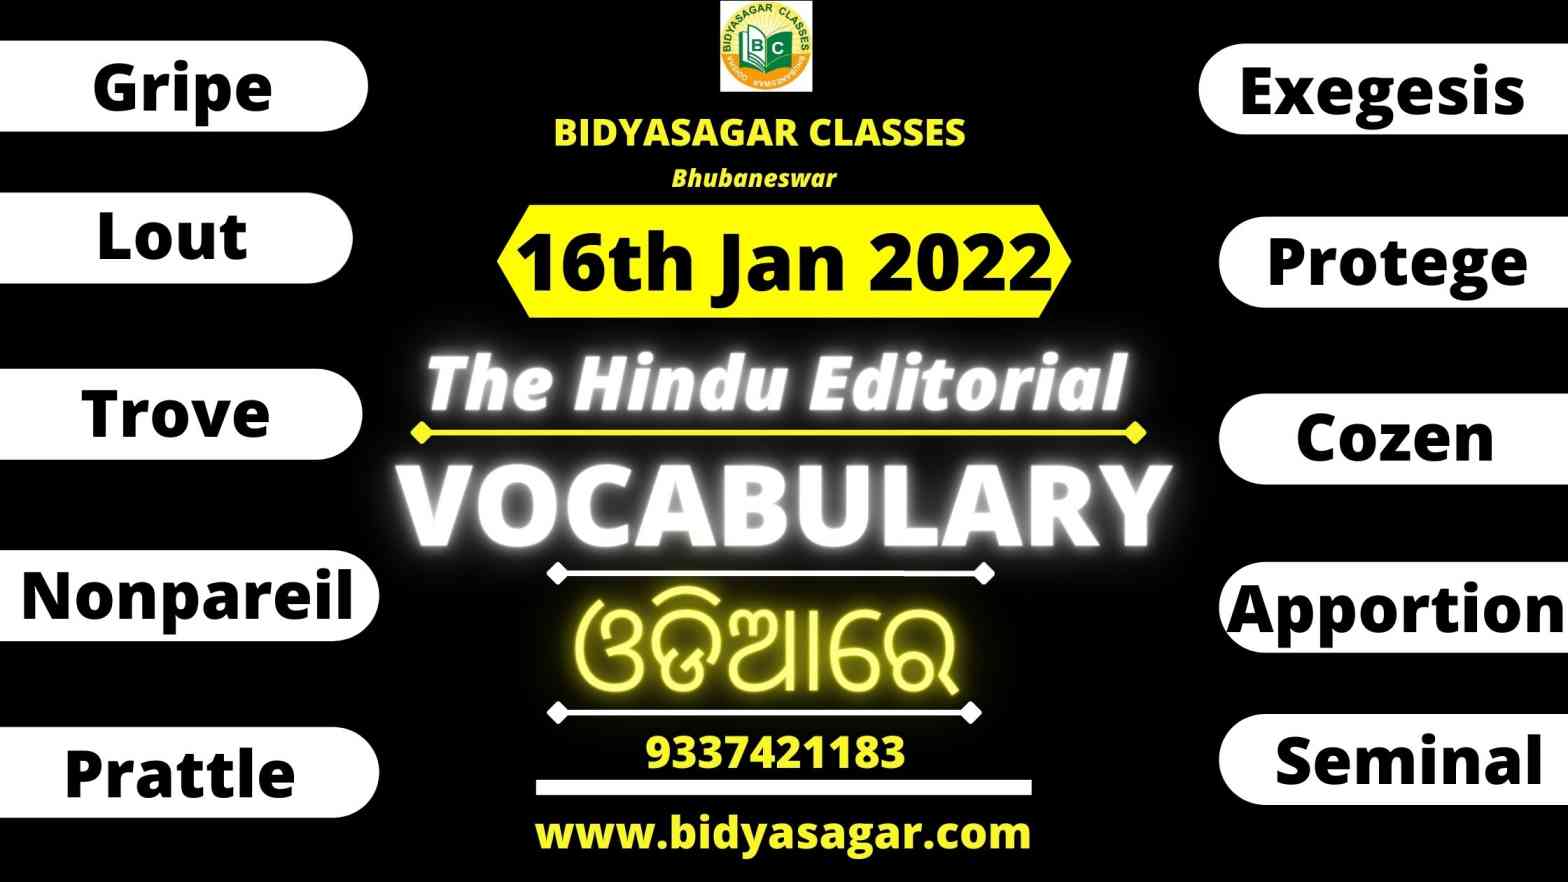 The Hindu Editorial Vocabulary of 16th January 2022